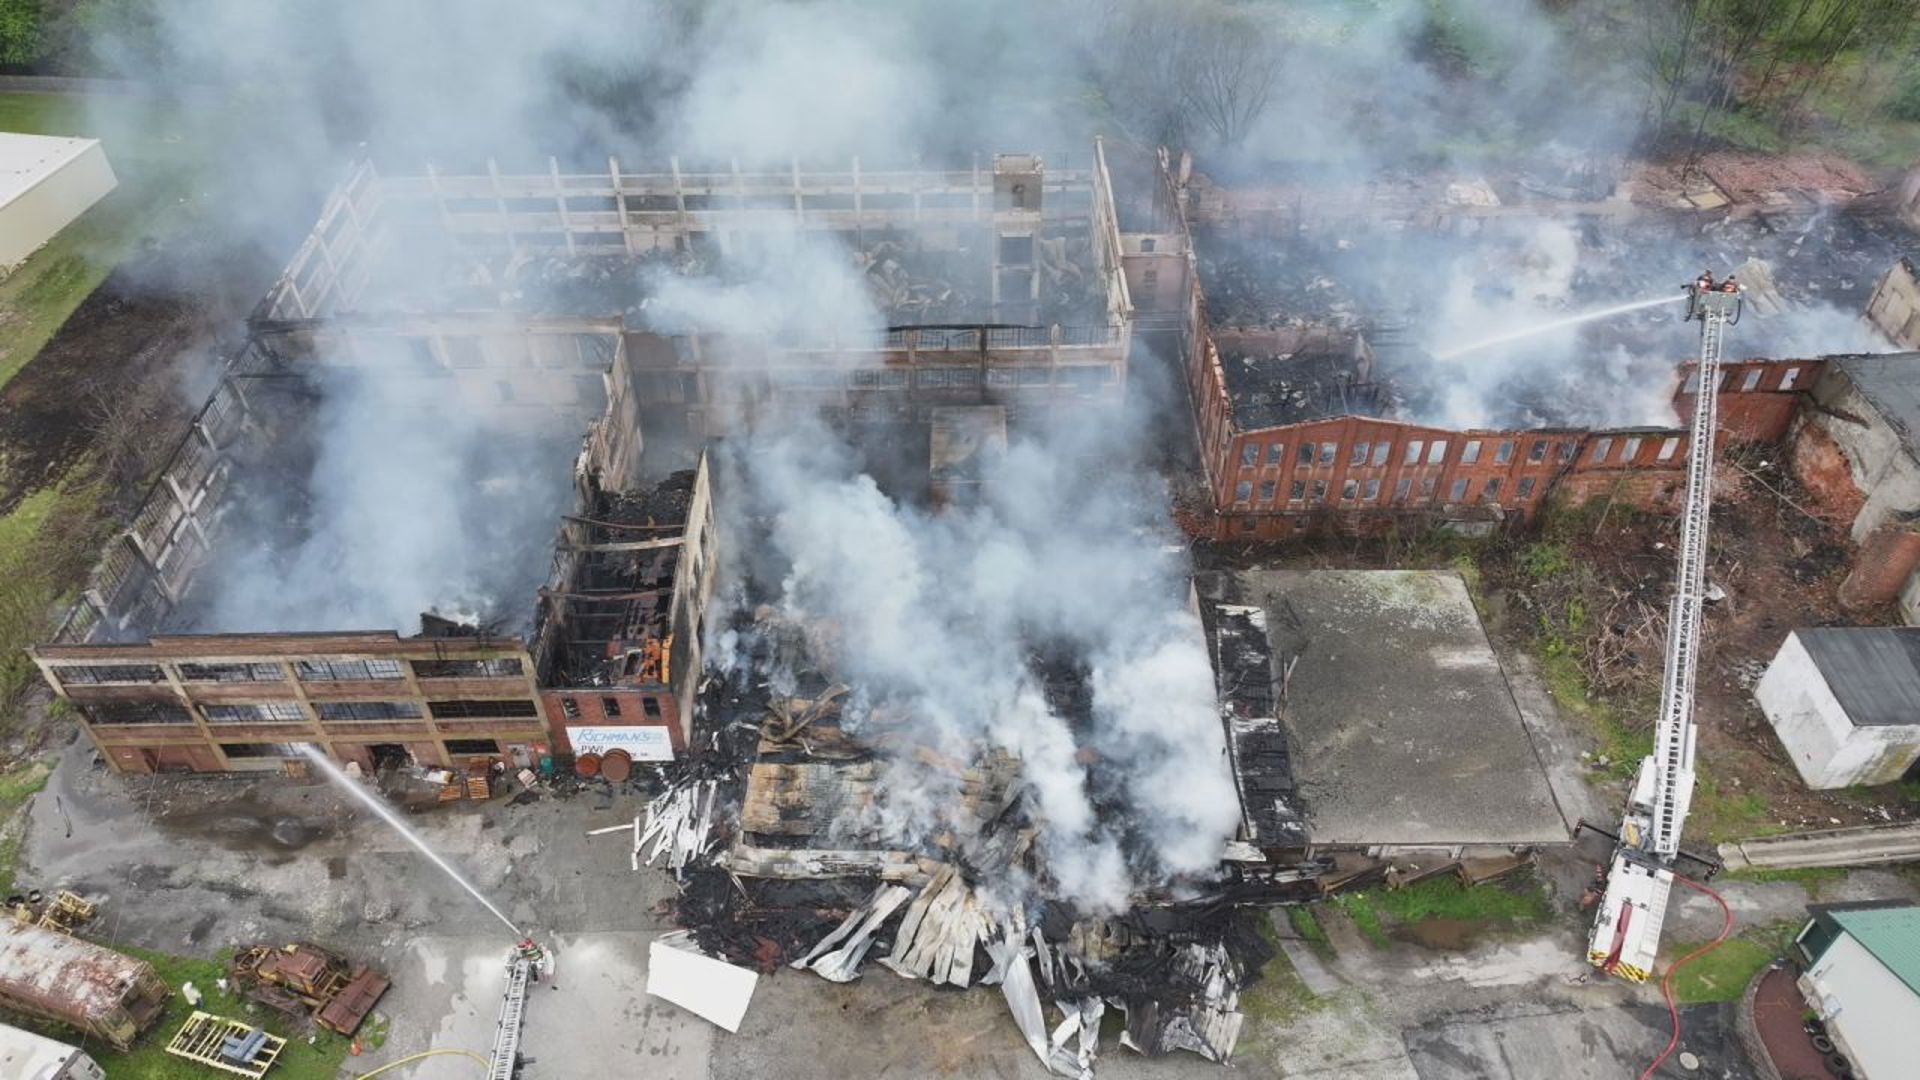 Drone footage from FOX43 News videographer Owen Daniels shows the immense damage caused at the warehouse in Stewartstown following a six-alarm fire.